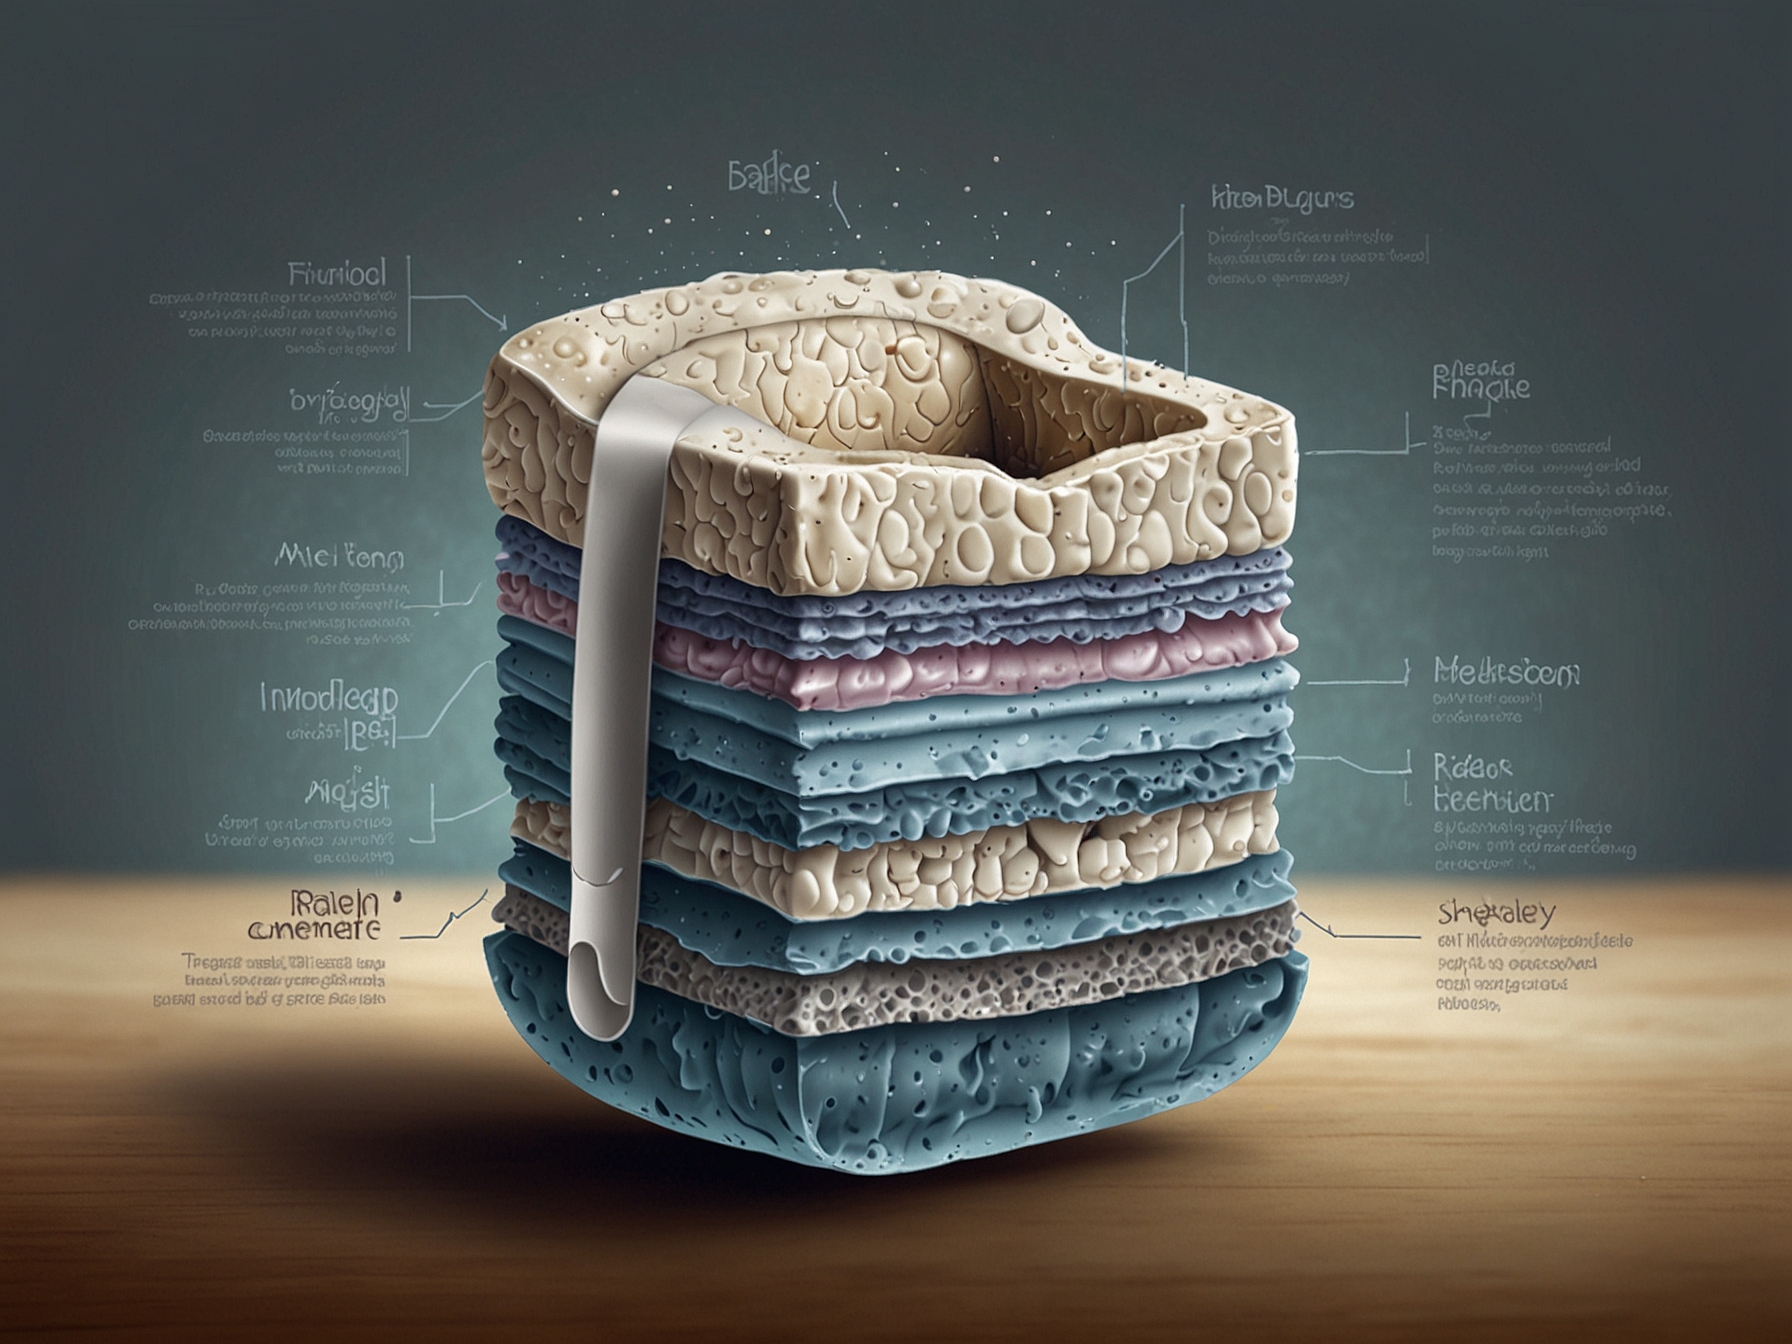 An illustrated cross-section of a diaper, highlighting the layers of superabsorbent polymers and hydrophobic materials that work together to absorb and retain liquid while keeping the outer layer dry.